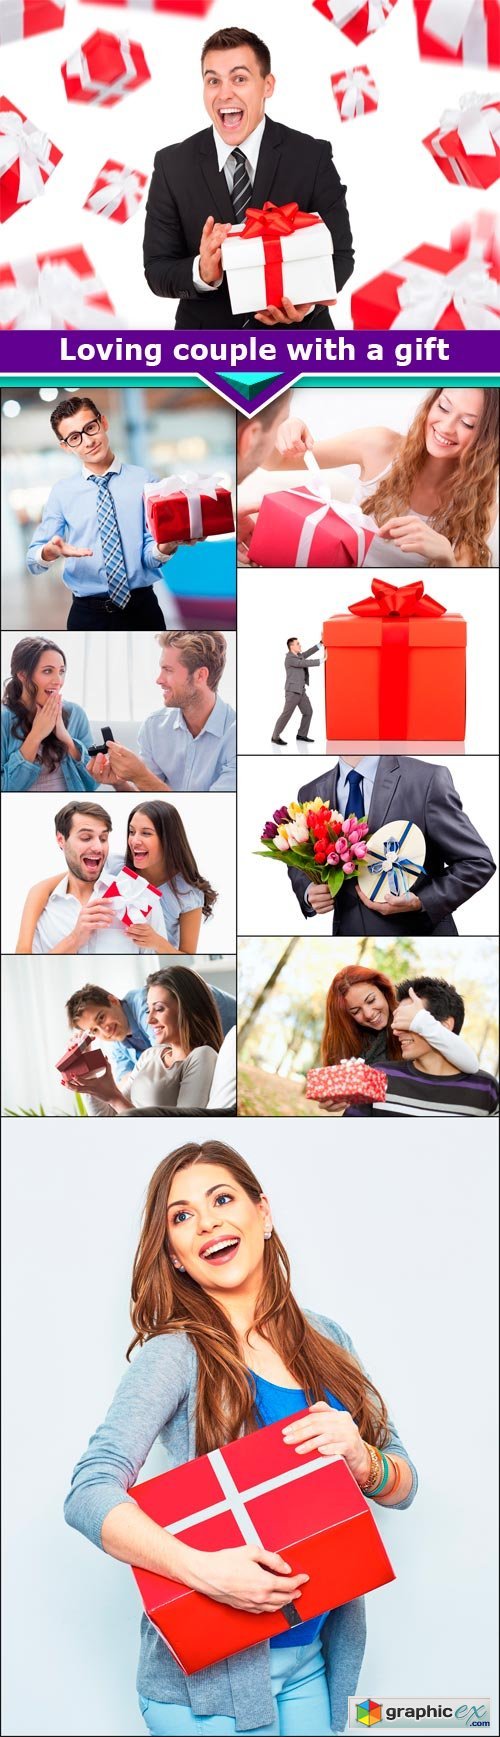 Loving couple with a gift 10x JPEG